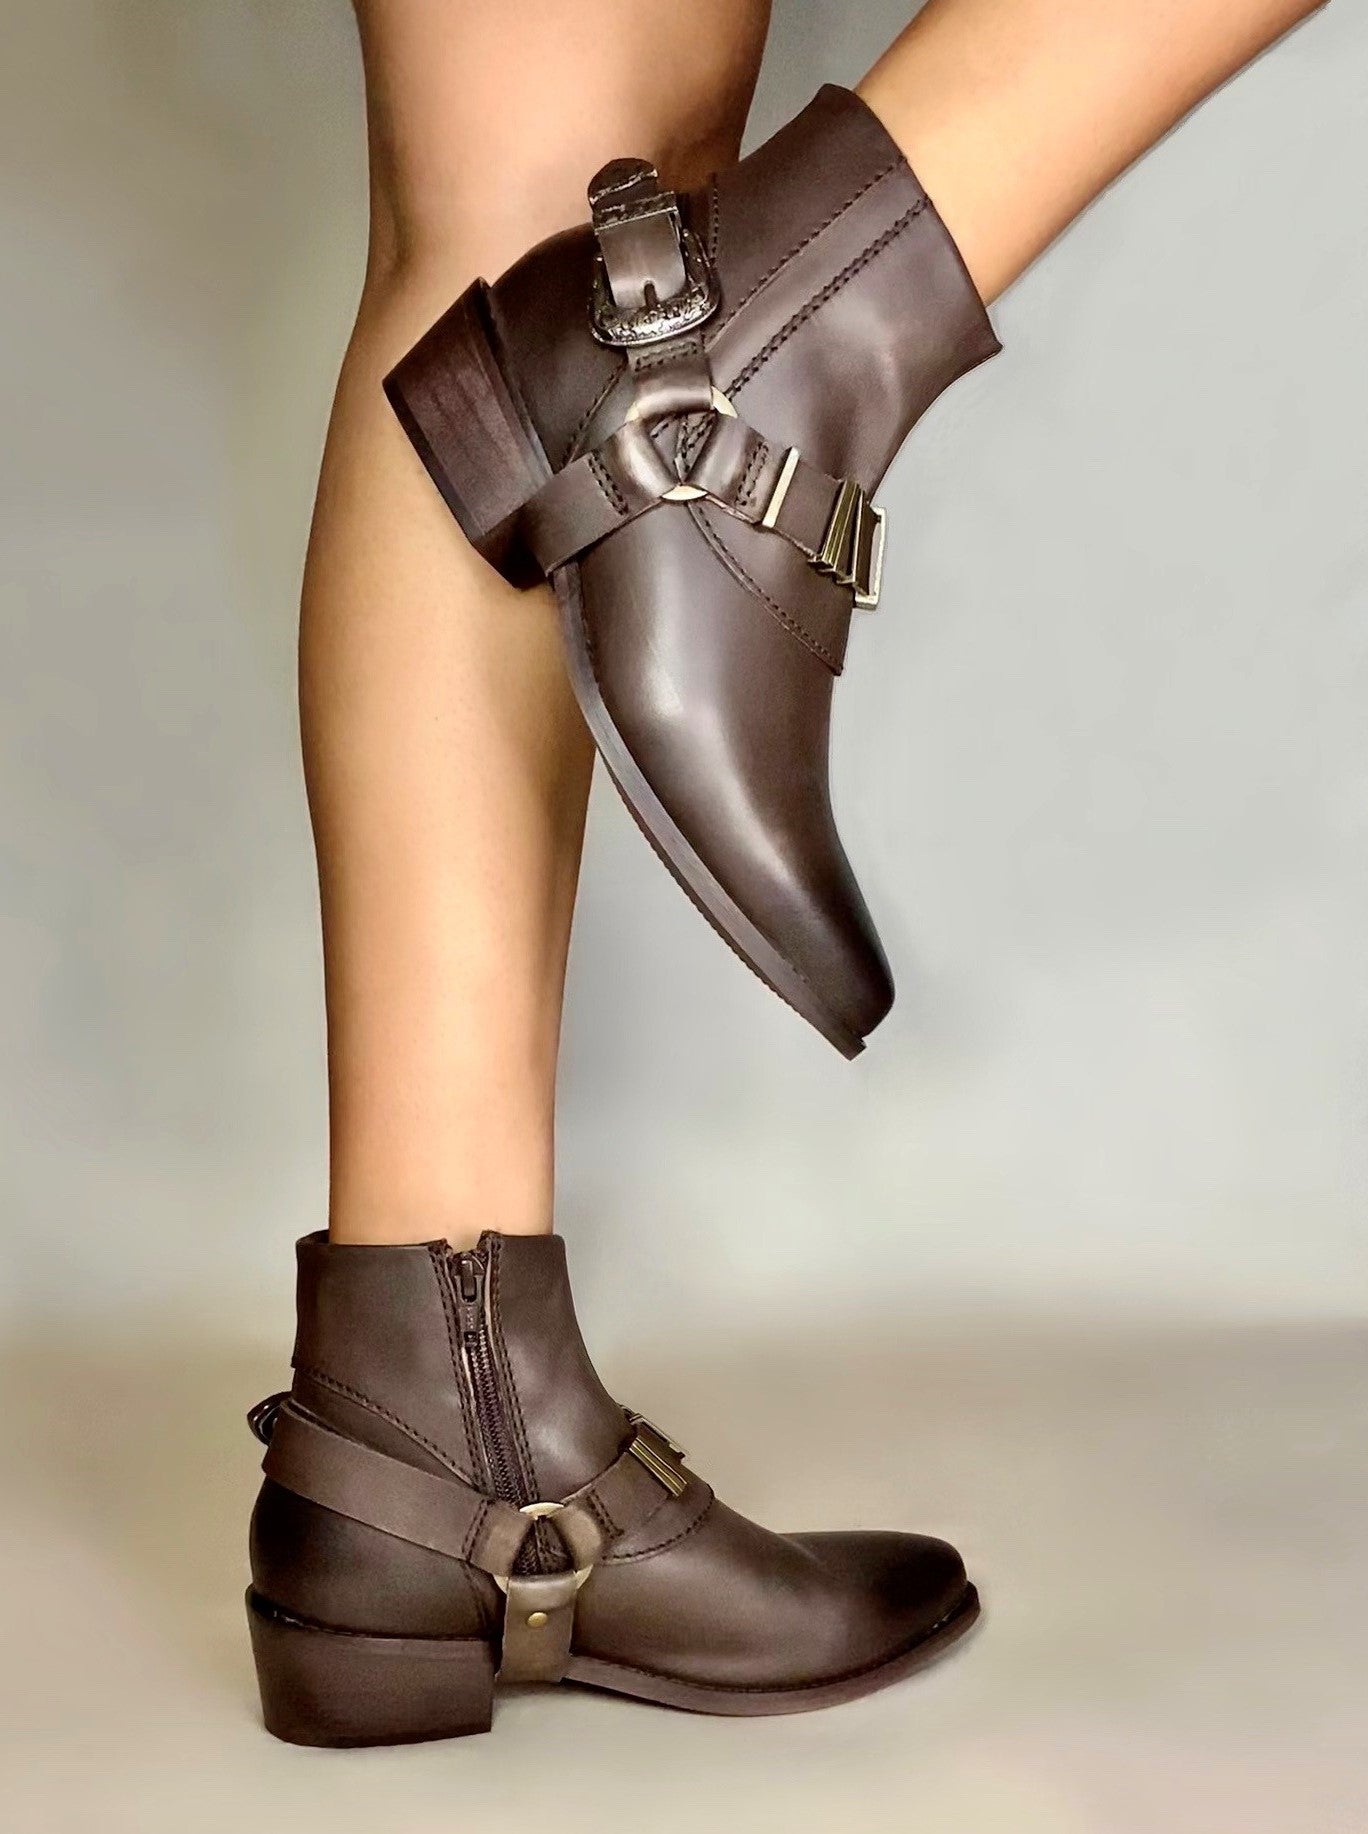 Fashion Chic Harness Western Ankle Boot